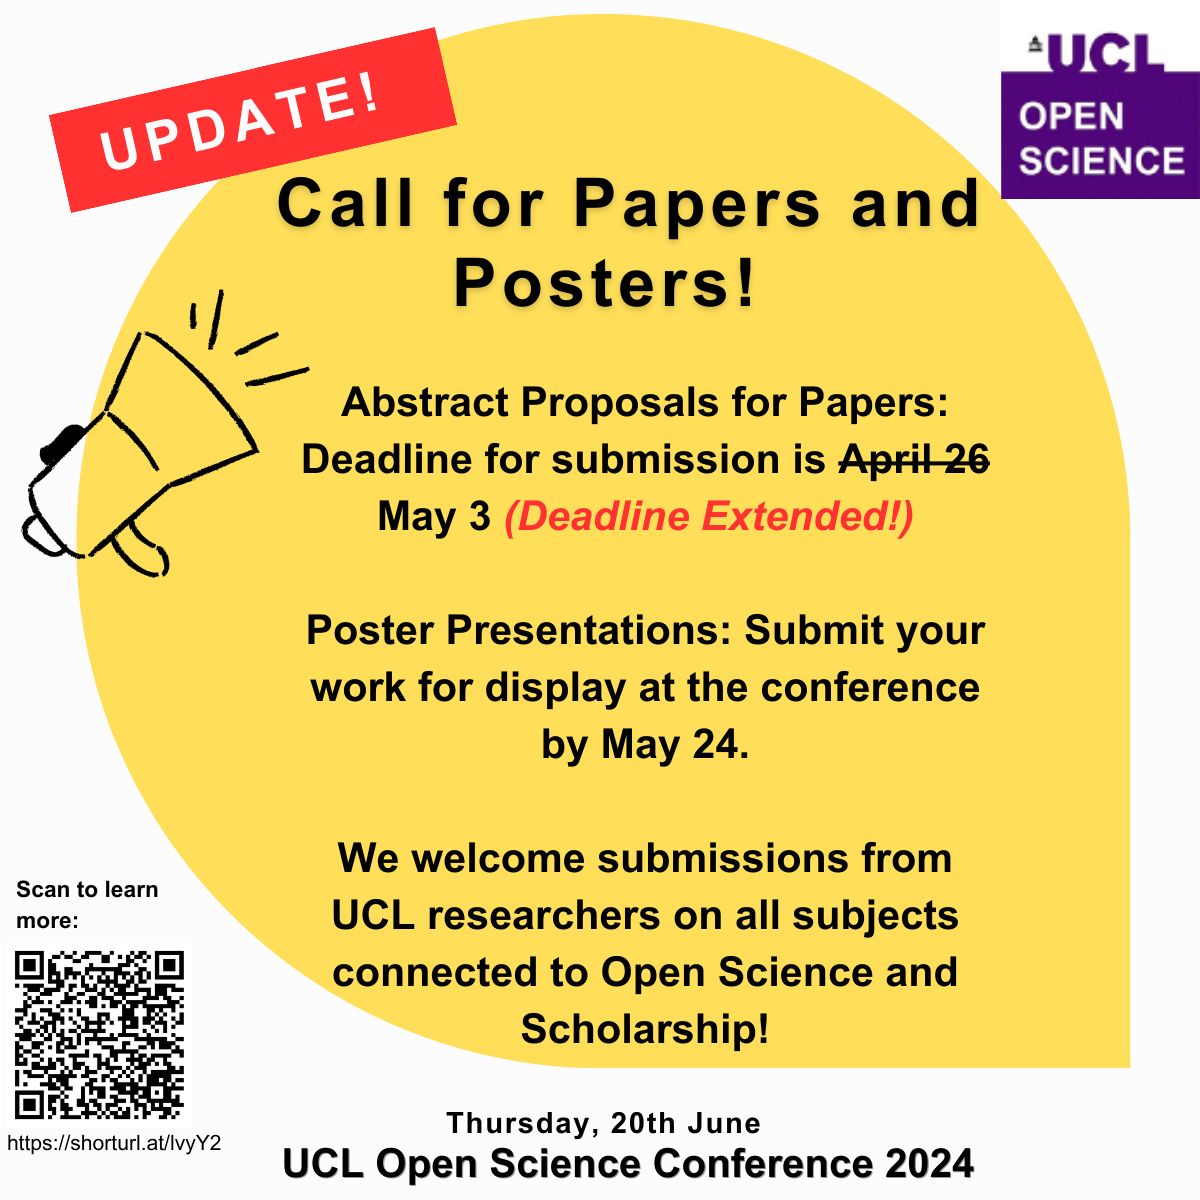 🚨Update: Deadline Extended! 🚨 The deadline for submissions to the UCL Open Science Conference has been extended! Haven't submitted your abstracts yet? You now have more time! The new deadline is May 3. Submit your proposals ASAP! More info: buff.ly/3TLRDdt @ucylpay